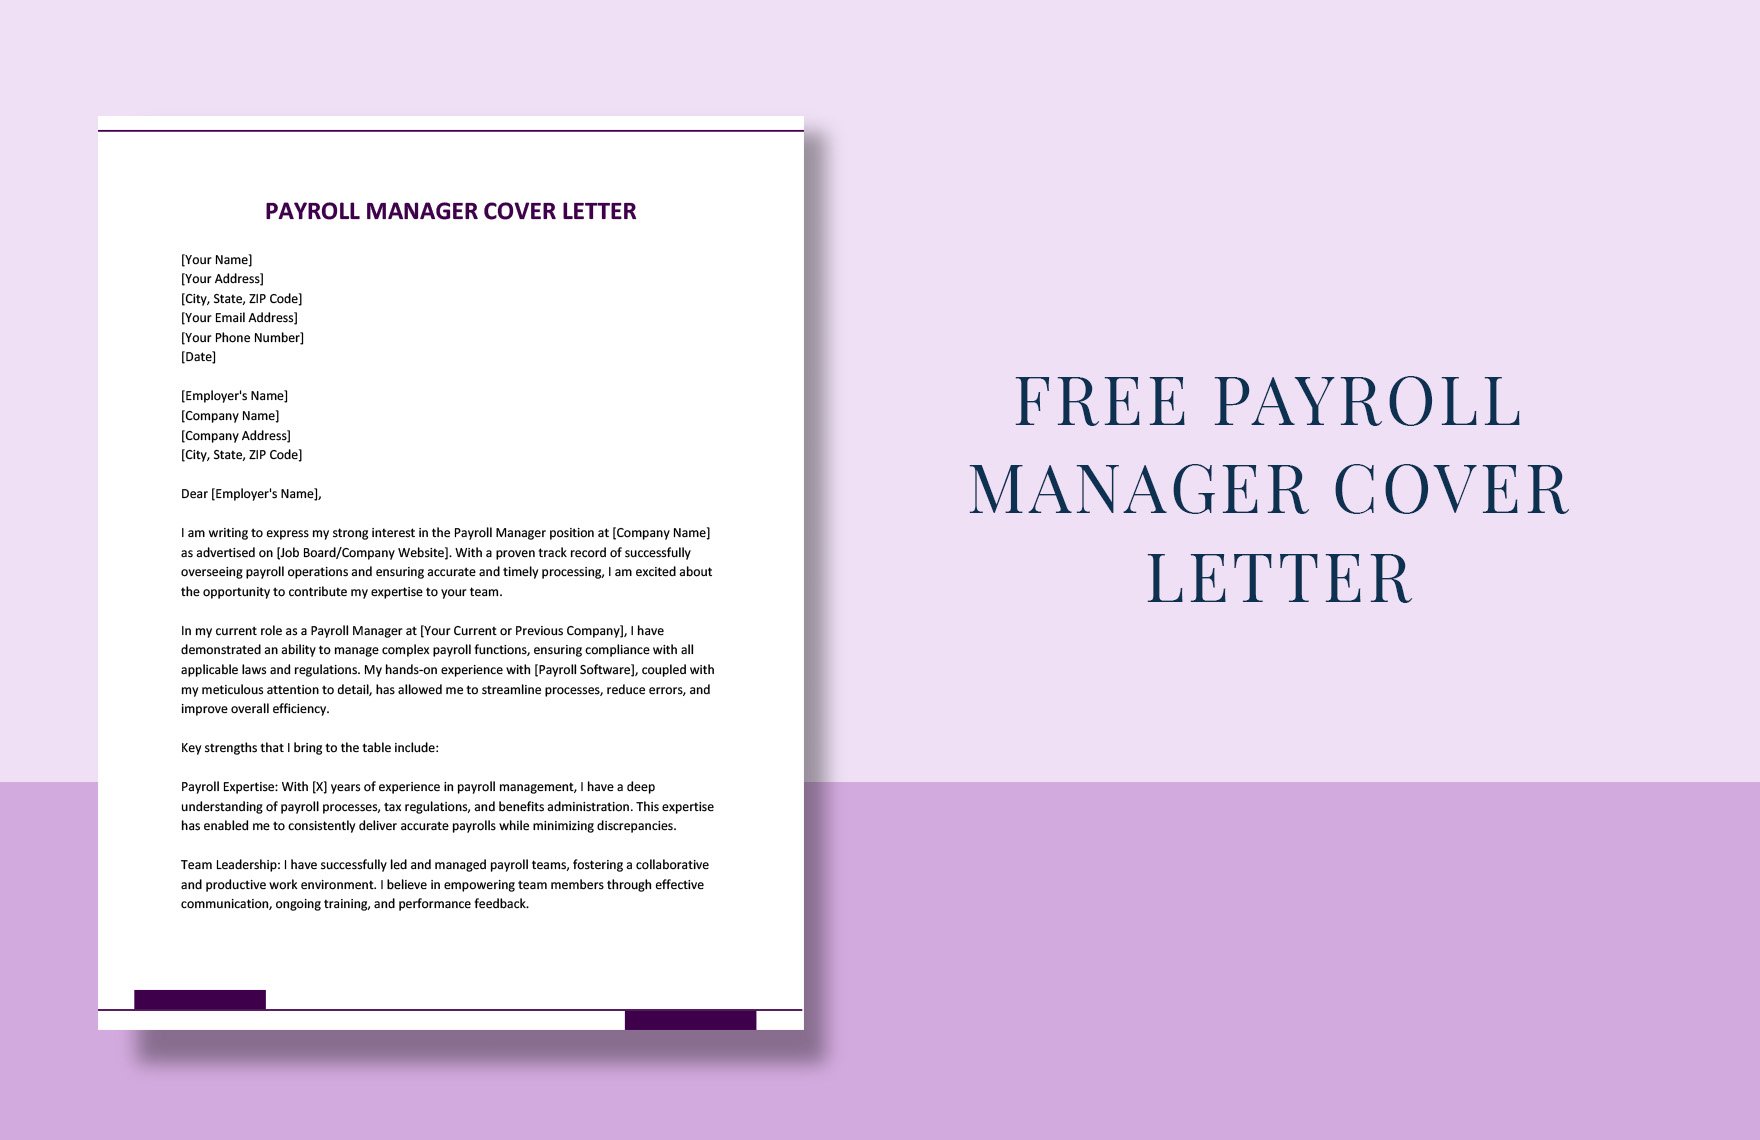 Payroll Manager Cover Letter